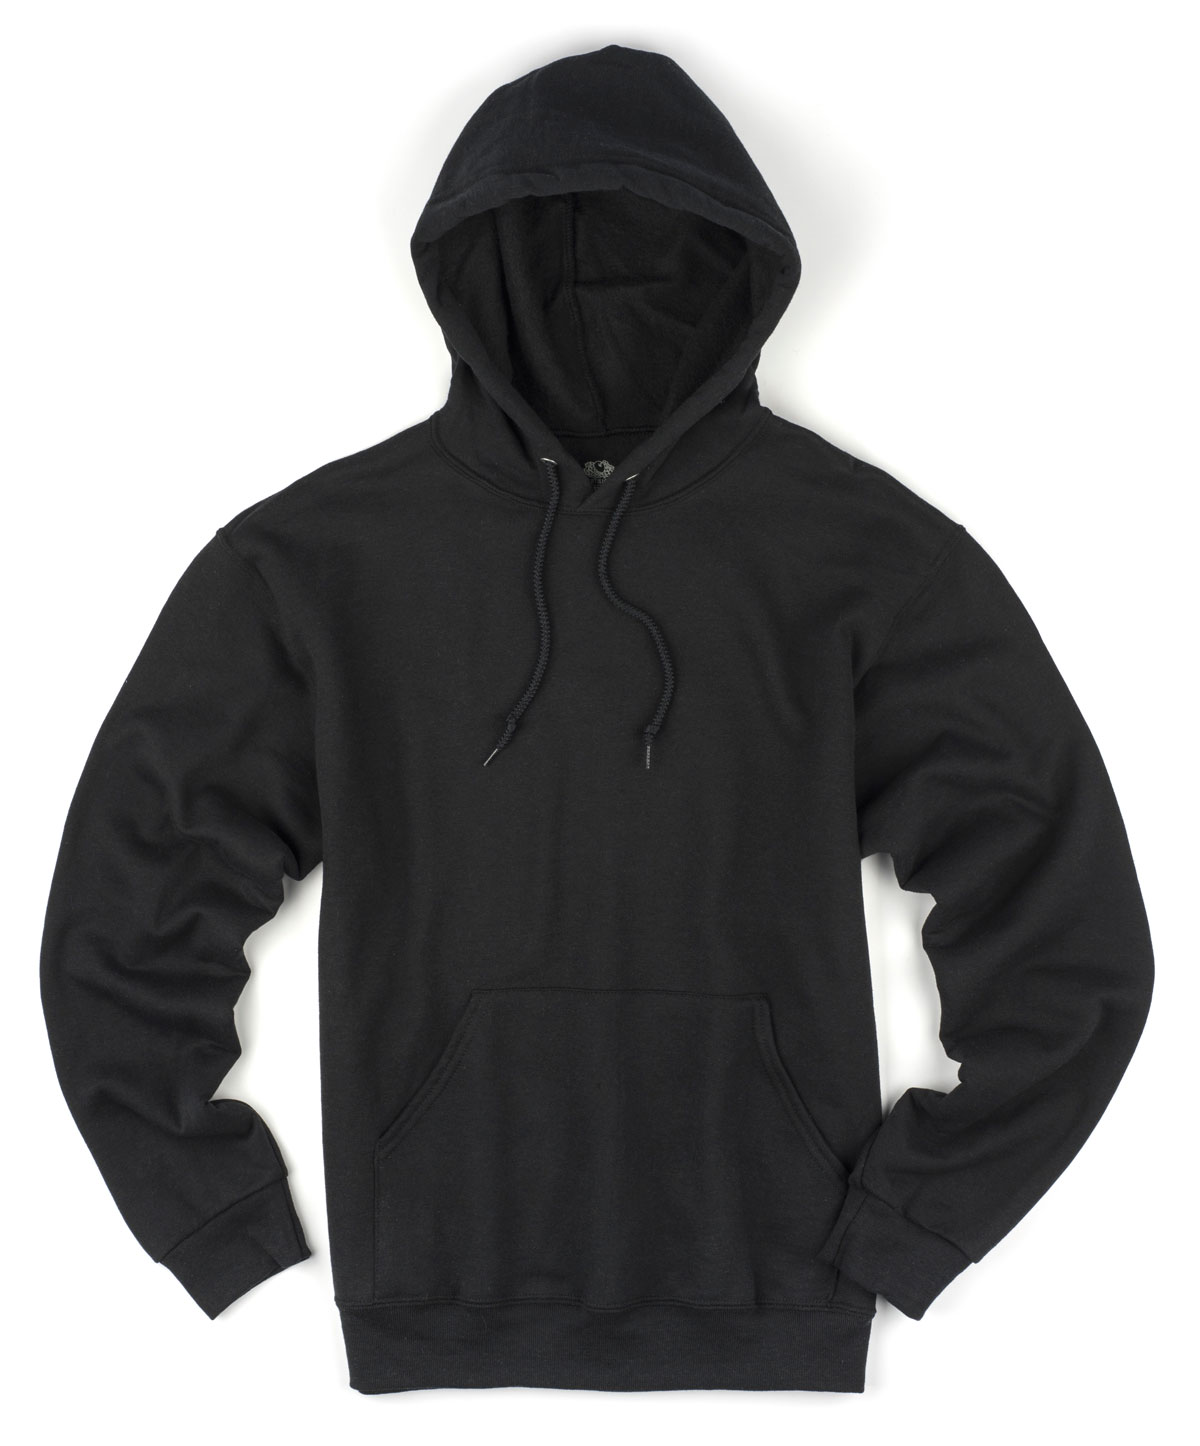 Plain Wholesale Black Hoodies  The Cheapest Pullovers by the Dozen